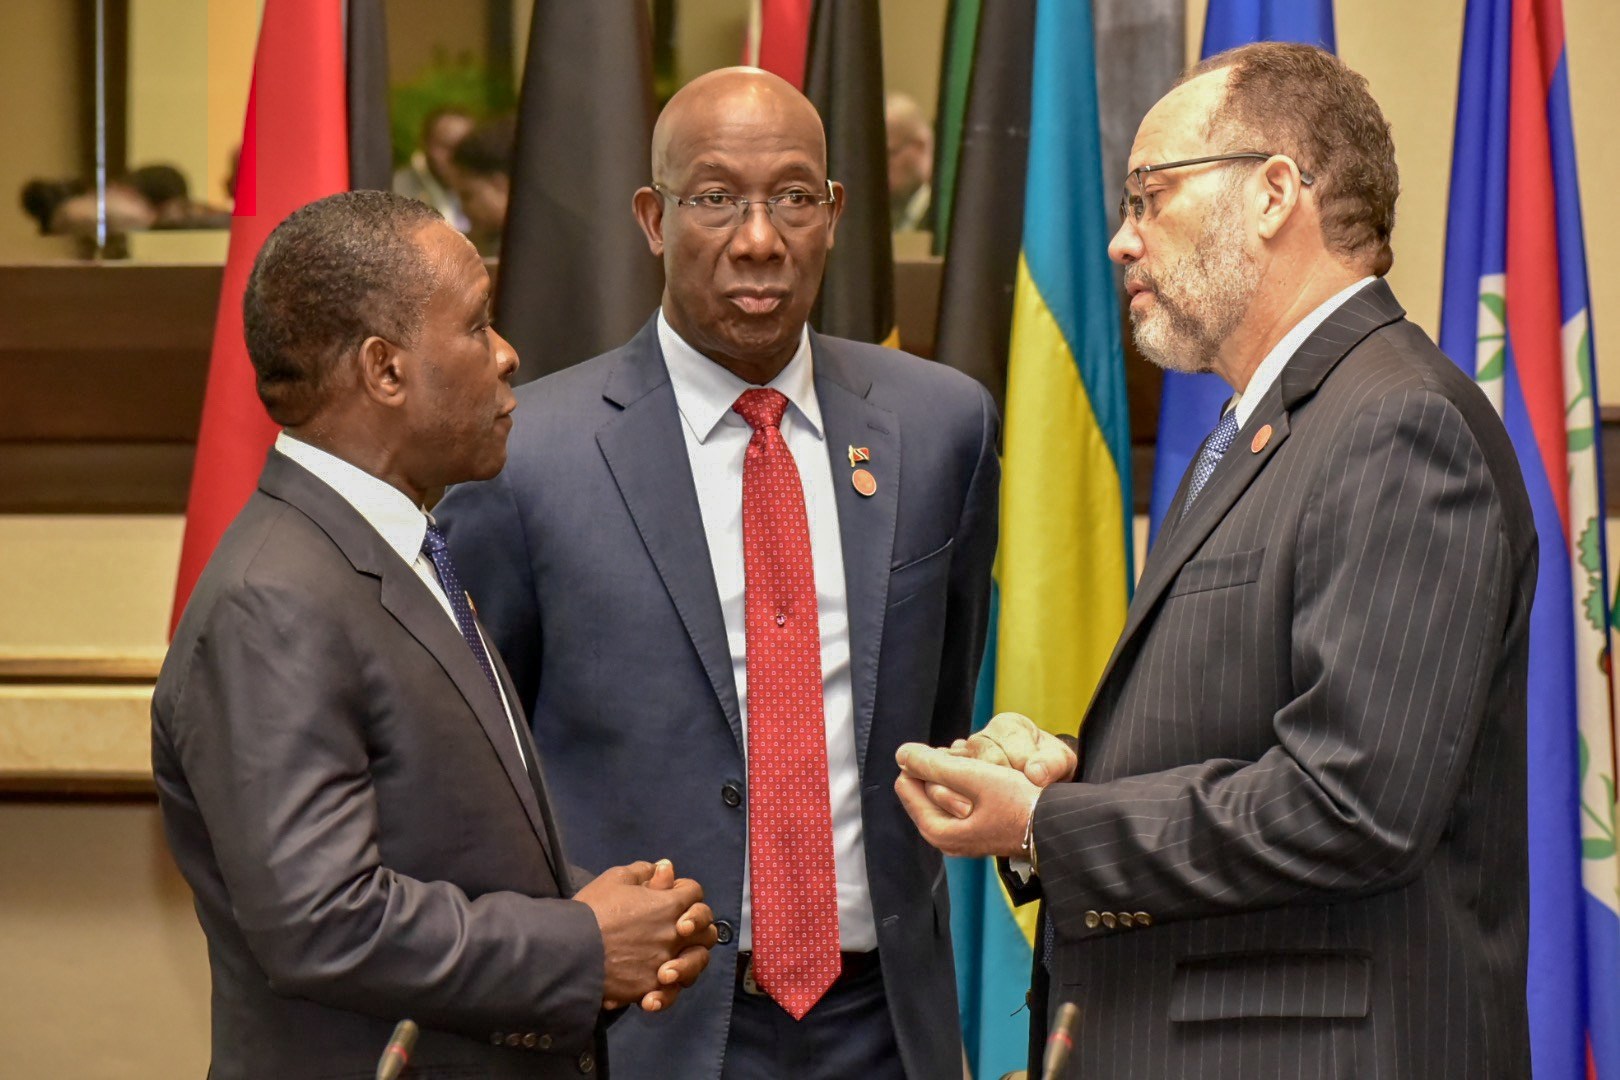  Statement – Prime Minister Rowley to Parliament on CSME